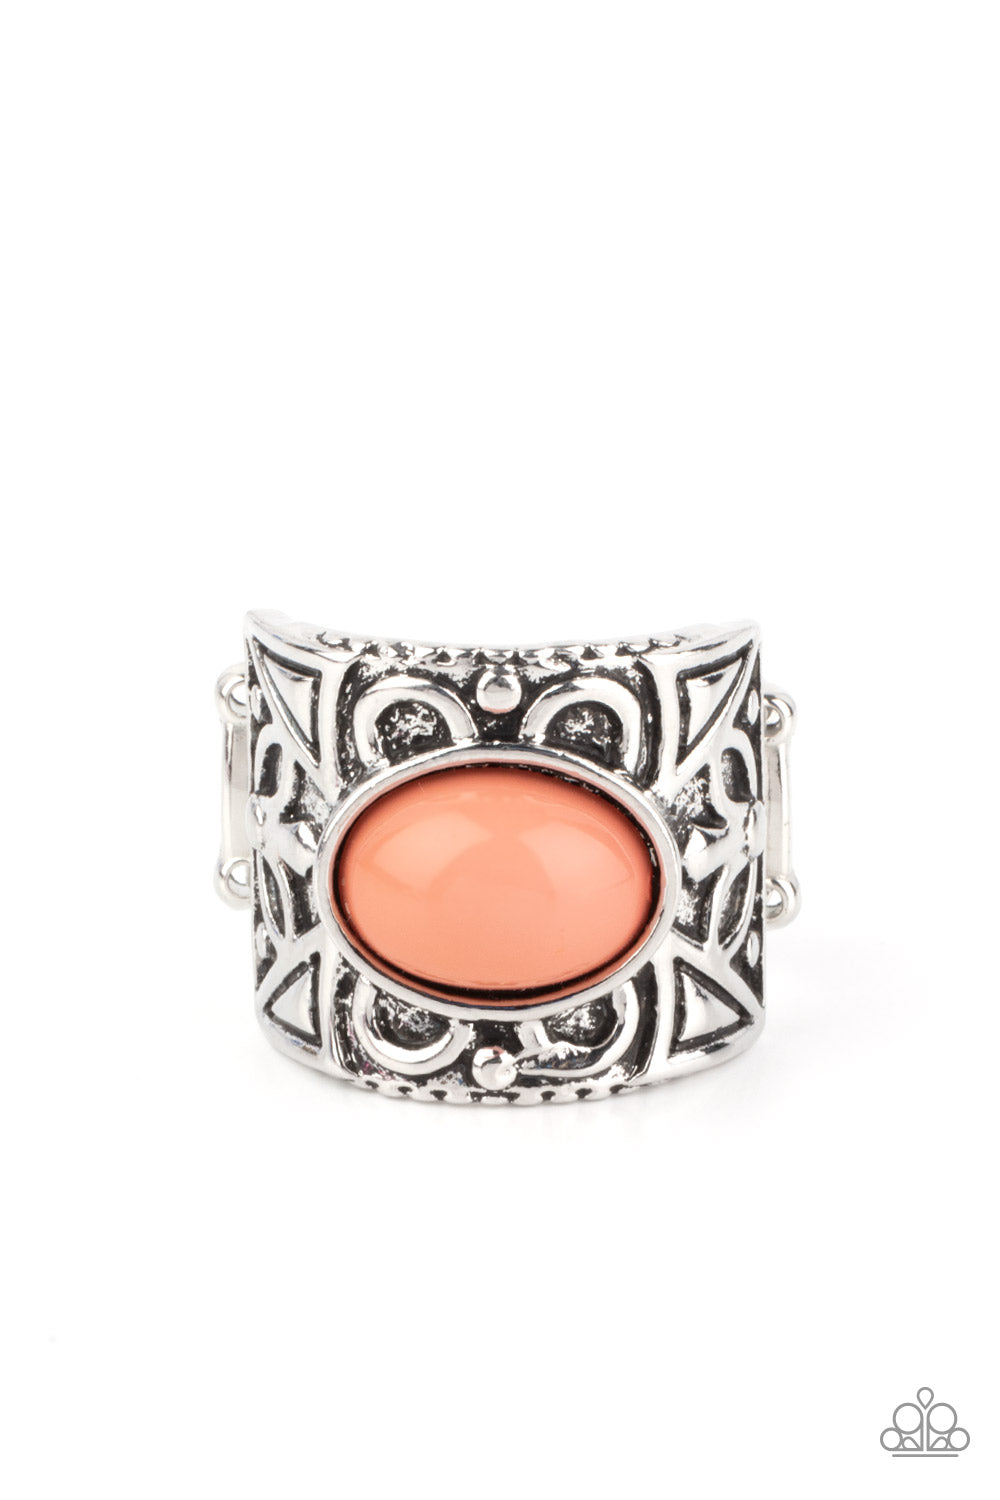 Bubbly Bonanza Orange Ring - Paparazzi Accessories  A bubbly Burnt Coral bead is pressed into the center of a thick silver frame embossed in a leafy geometric pattern, creating a colorfully whimsical centerpiece. Features a stretchy band for a flexible fit.  All Paparazzi Accessories are lead free and nickel free!  Sold as one individual ring.